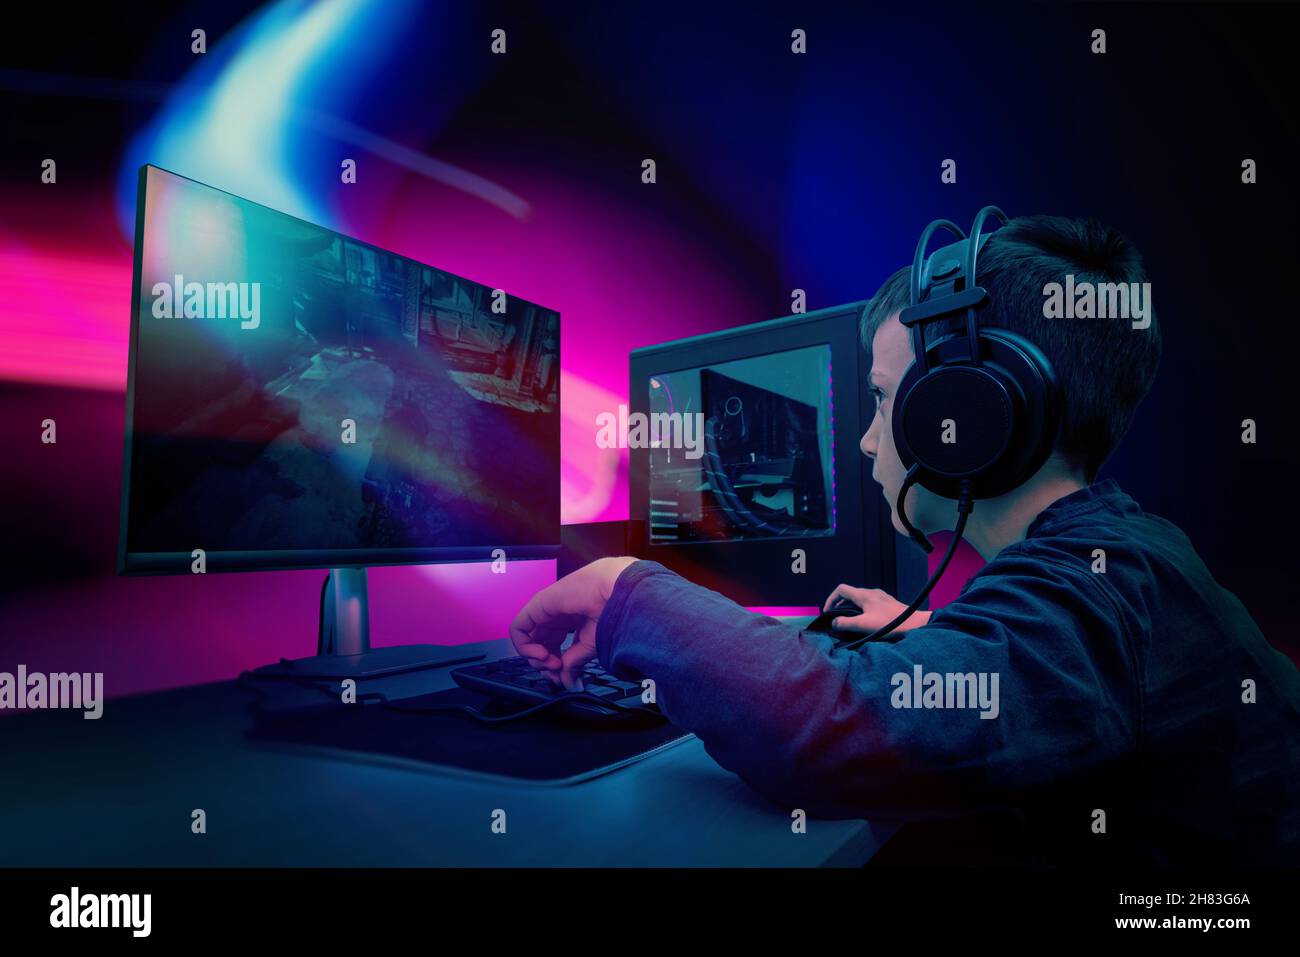 Young gamer playing game on gaming computer. Pink and blue led lights in background Stock Photo